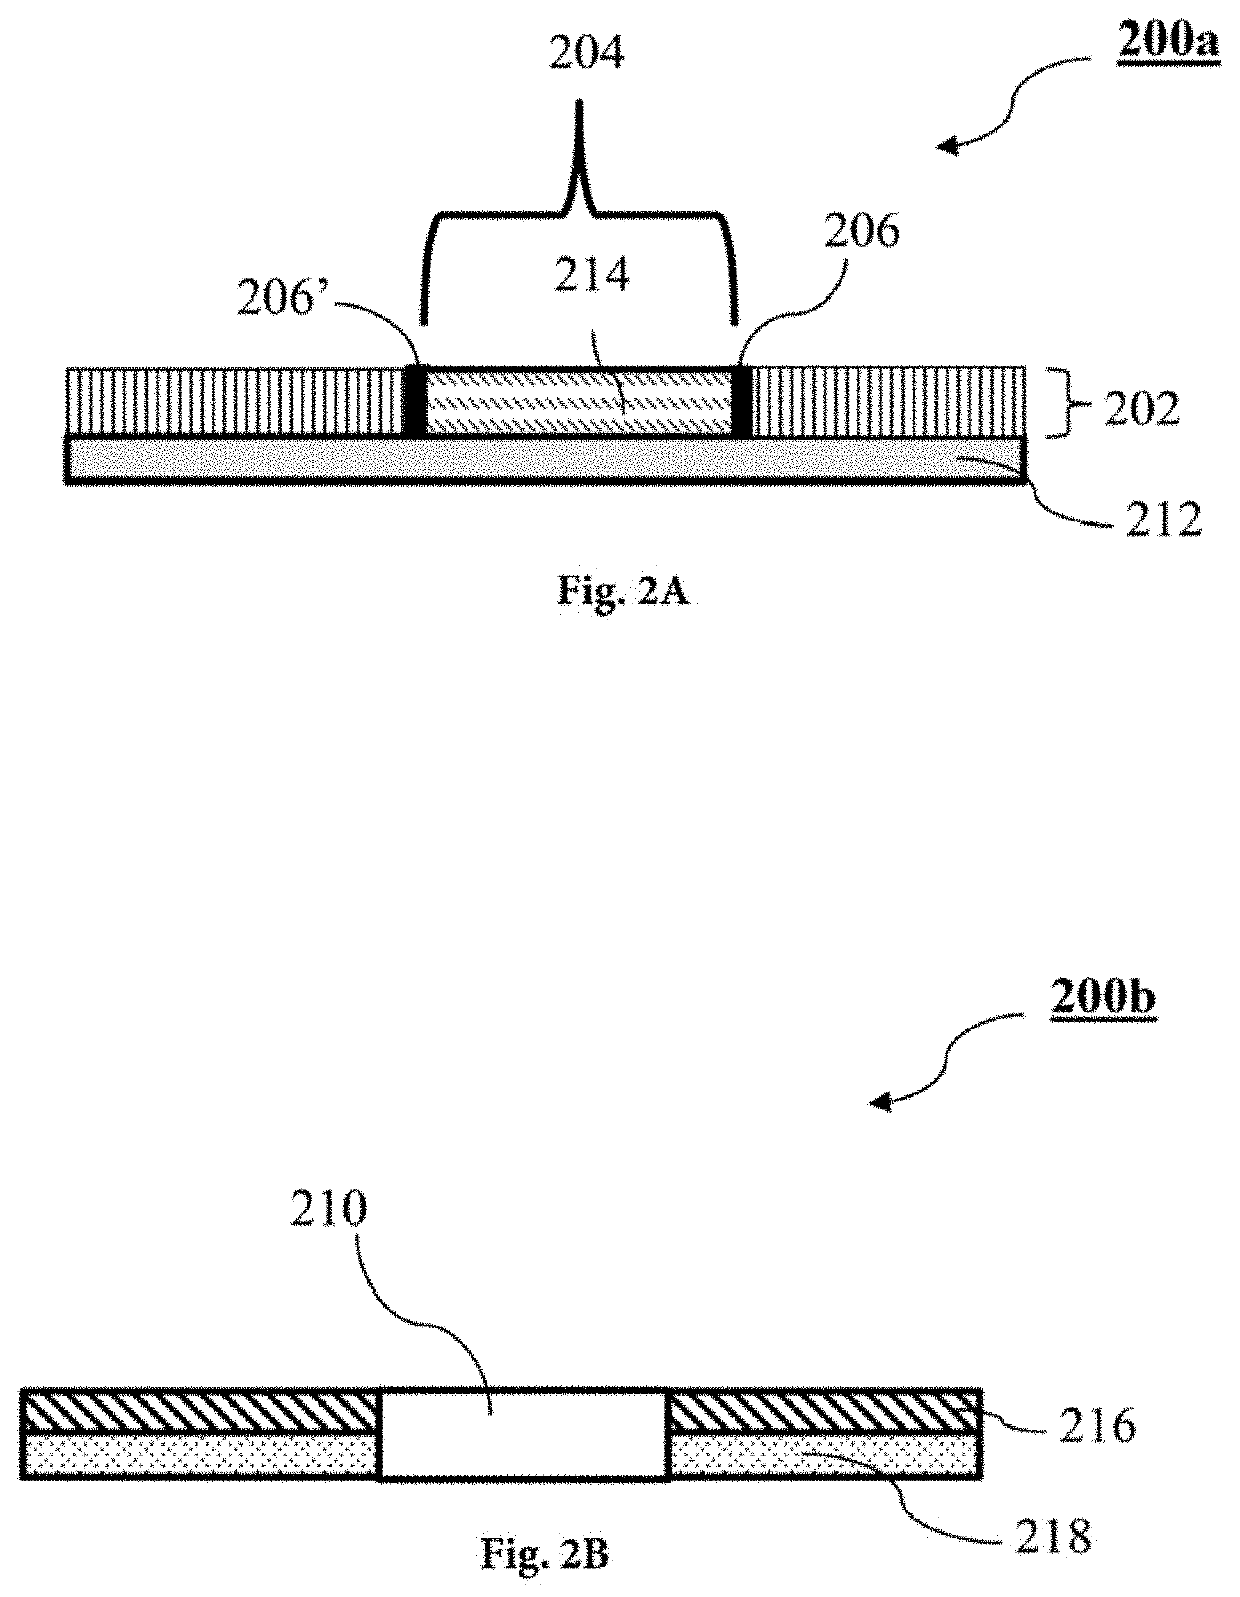 A method of embedding an imaging device within a display